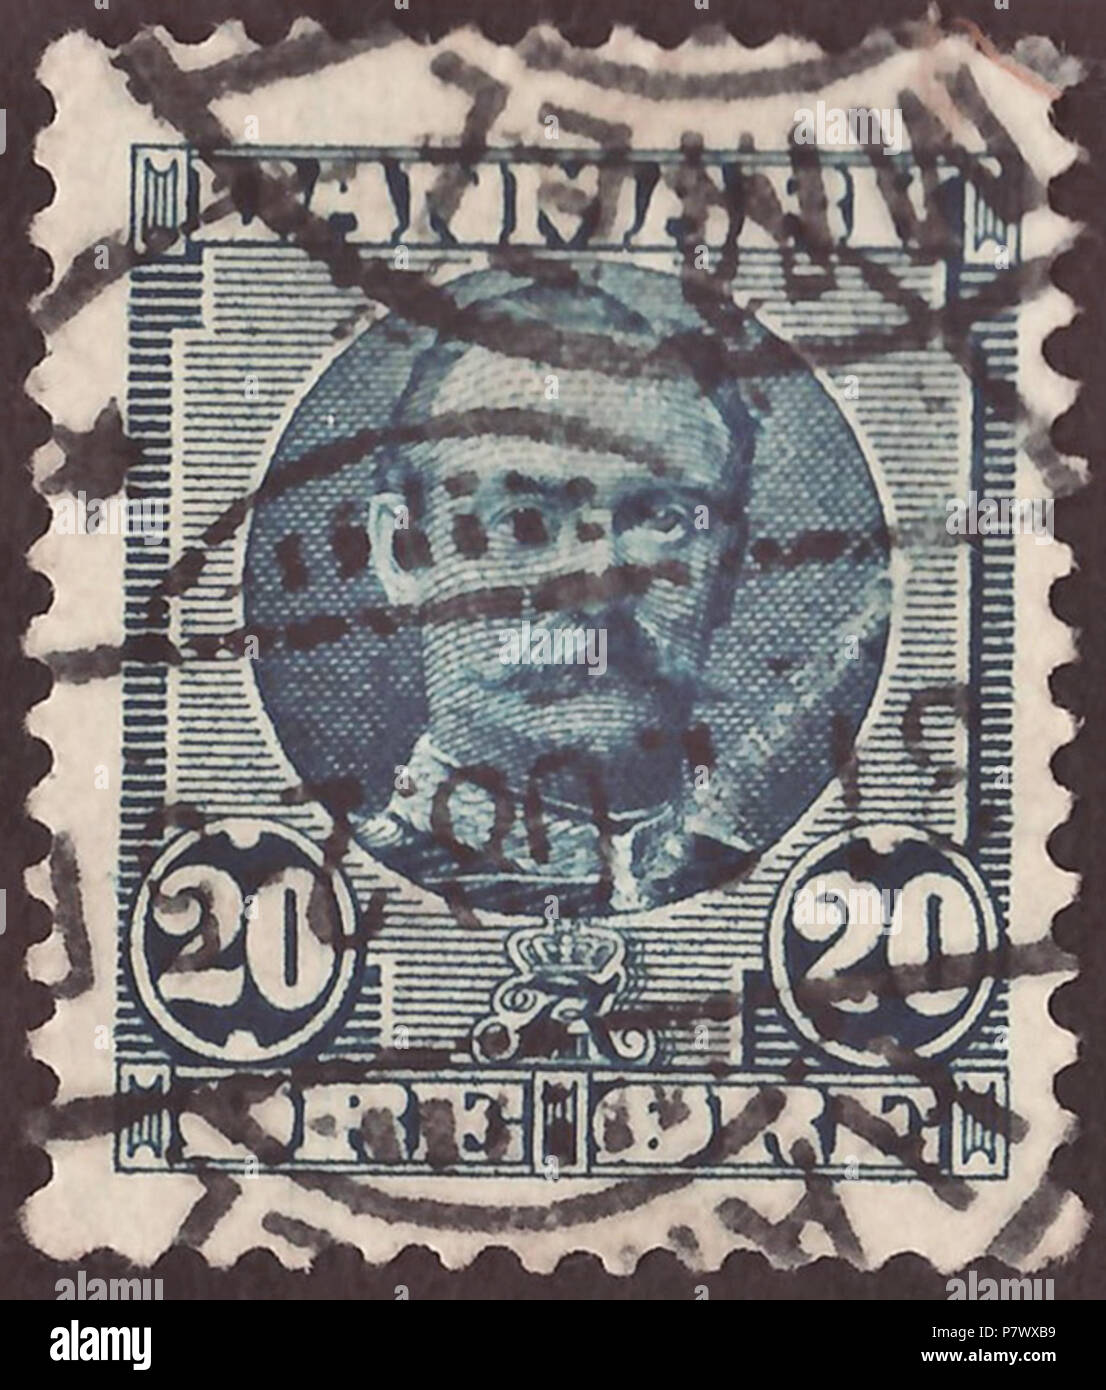 Stamp of the Kingdom of Denmark; 1907; definitive stamp of the issue 'King Frederick VIII of Denmark' (1907 series); postmarked in Hammel (Jutland), 1908 Stamp: Michel: No. 55a; Yvert et Tellier: No. 57; AFA: No. 56 Color: steel blue Watermark: Denmark No. 3 (Michel: No. 1Z) (new (great, oval) crown) Nominal value: 20 Øre Postage validity: from January 1907 until 31 December 1926 Stamp picture size (printed area): 17.5 x 20.0 mm Postmark: Hammel (East Jutland, near Aarhus), 31 December 1908 . January 1907 (first issue of the stamp) 31 December 1908 (date of postmark) 102 DAN 1907 MiNr0055a pm  Stock Photo